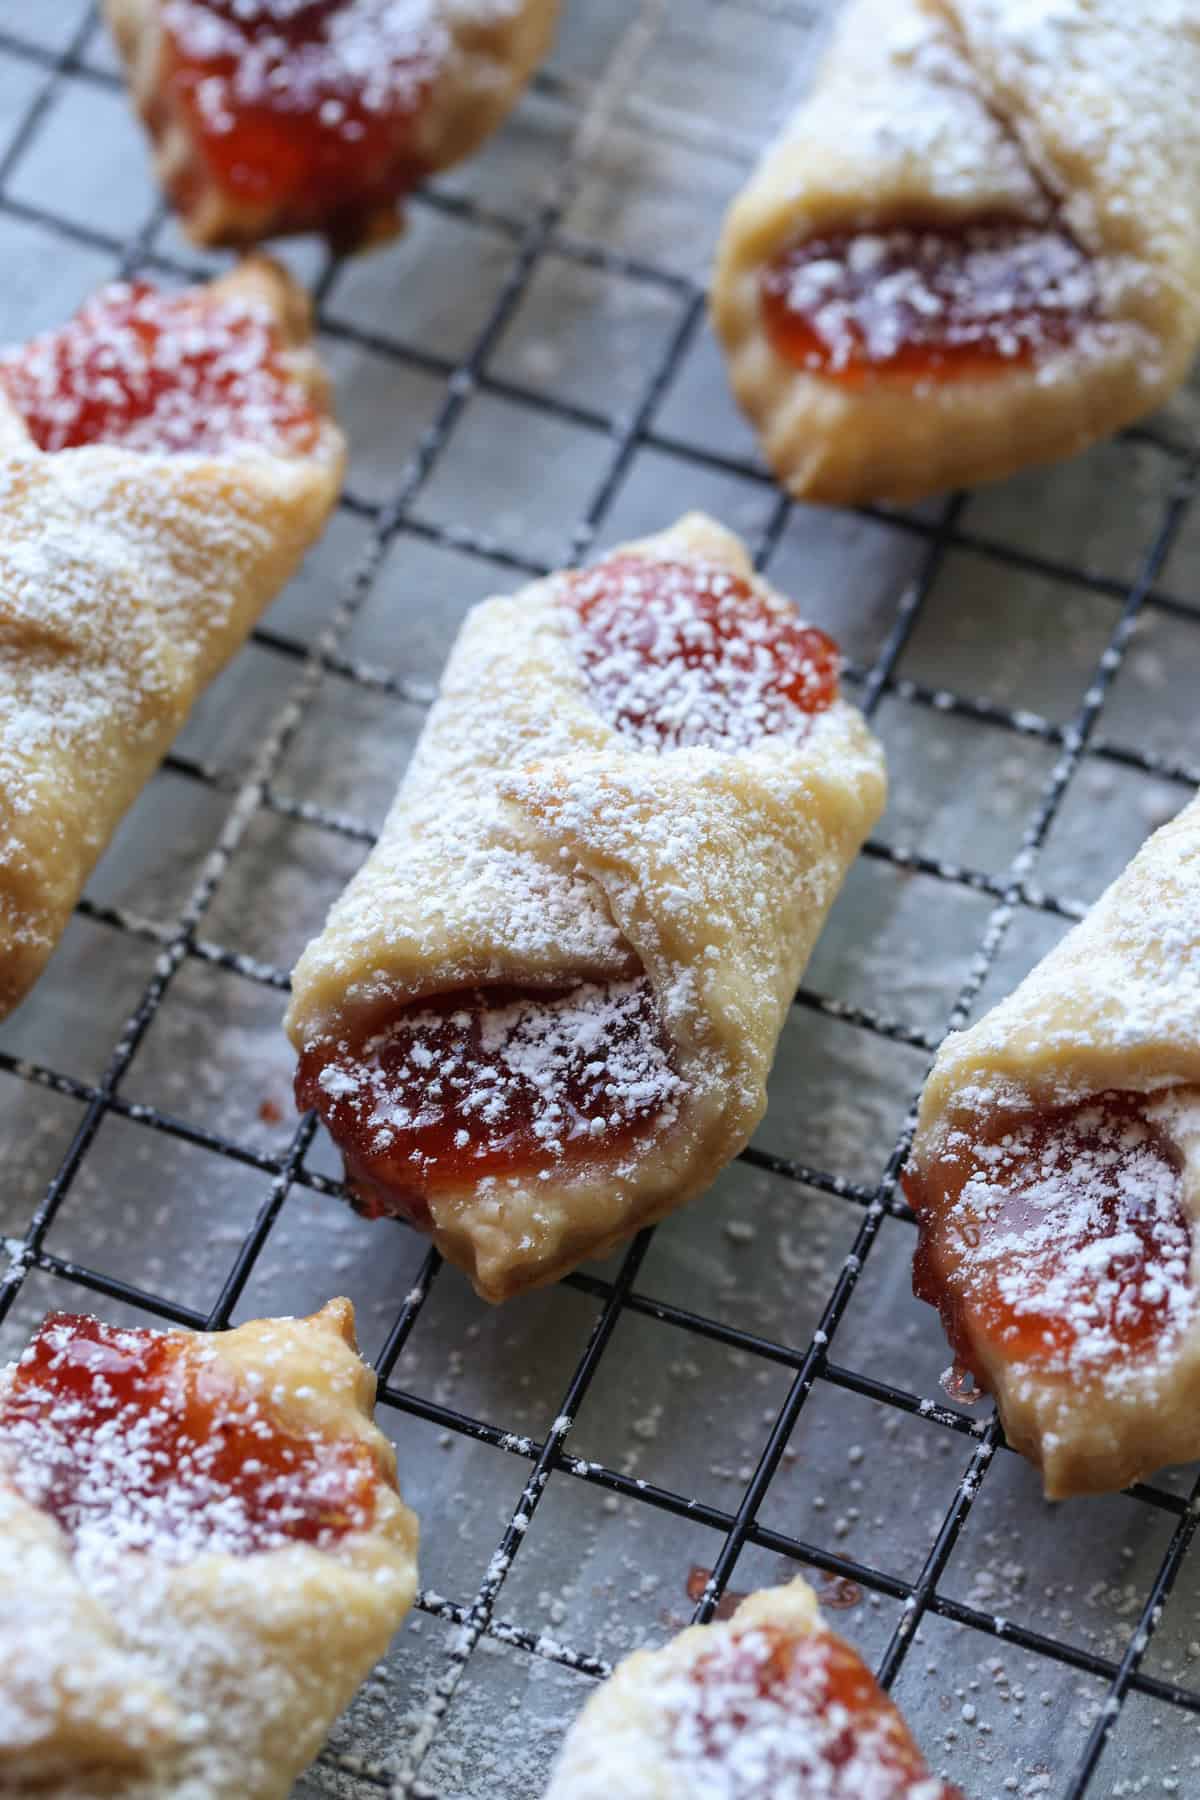 A close up of kolaczki cookies filled with strawberry preserves and dusted with powdered sugar.